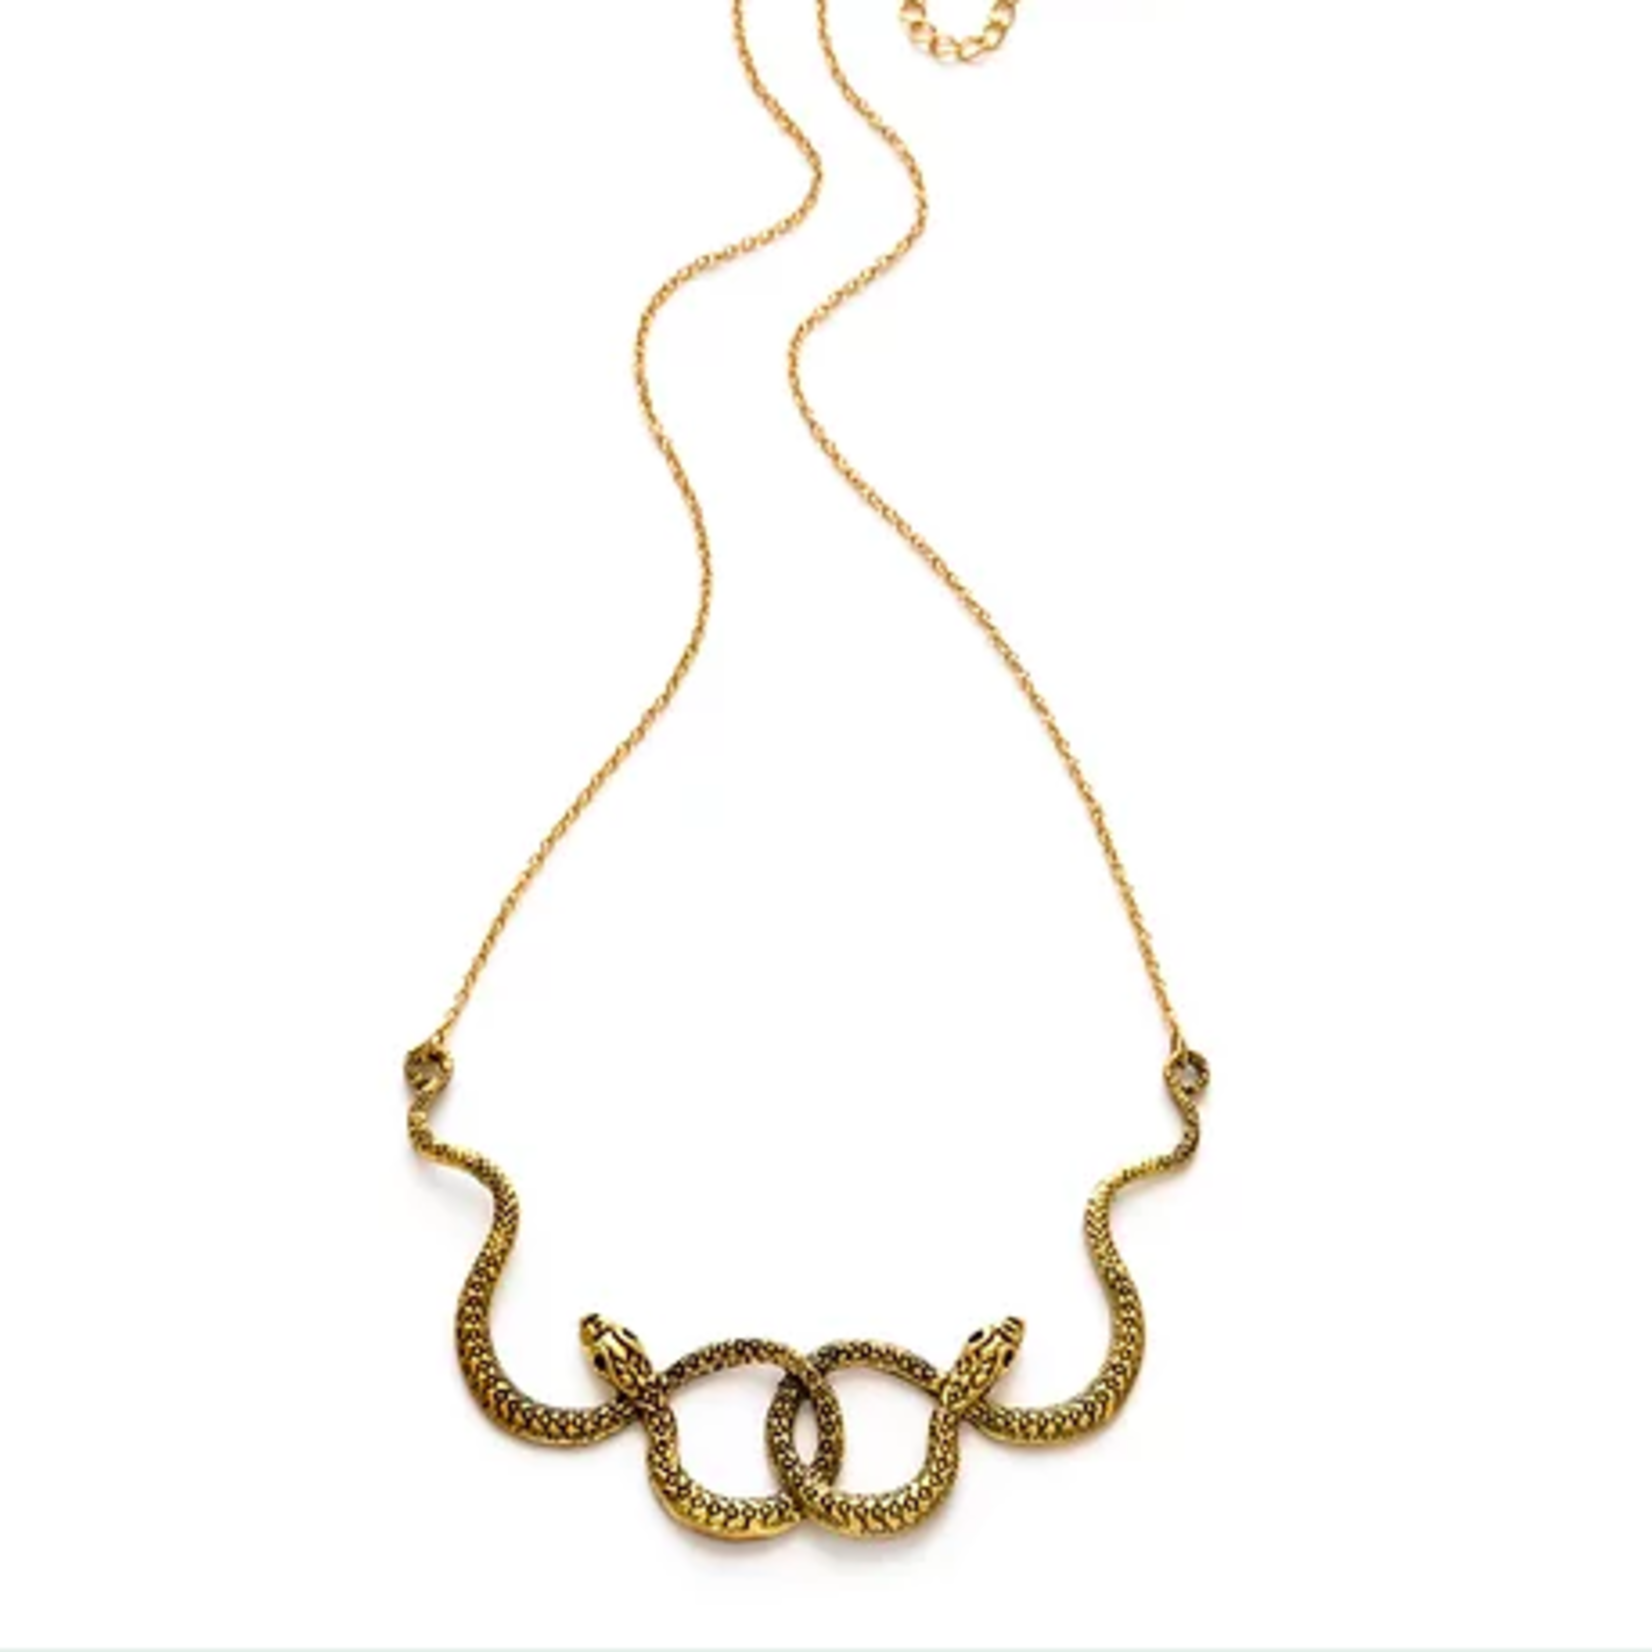 Ophidian Statement Necklace - Gold